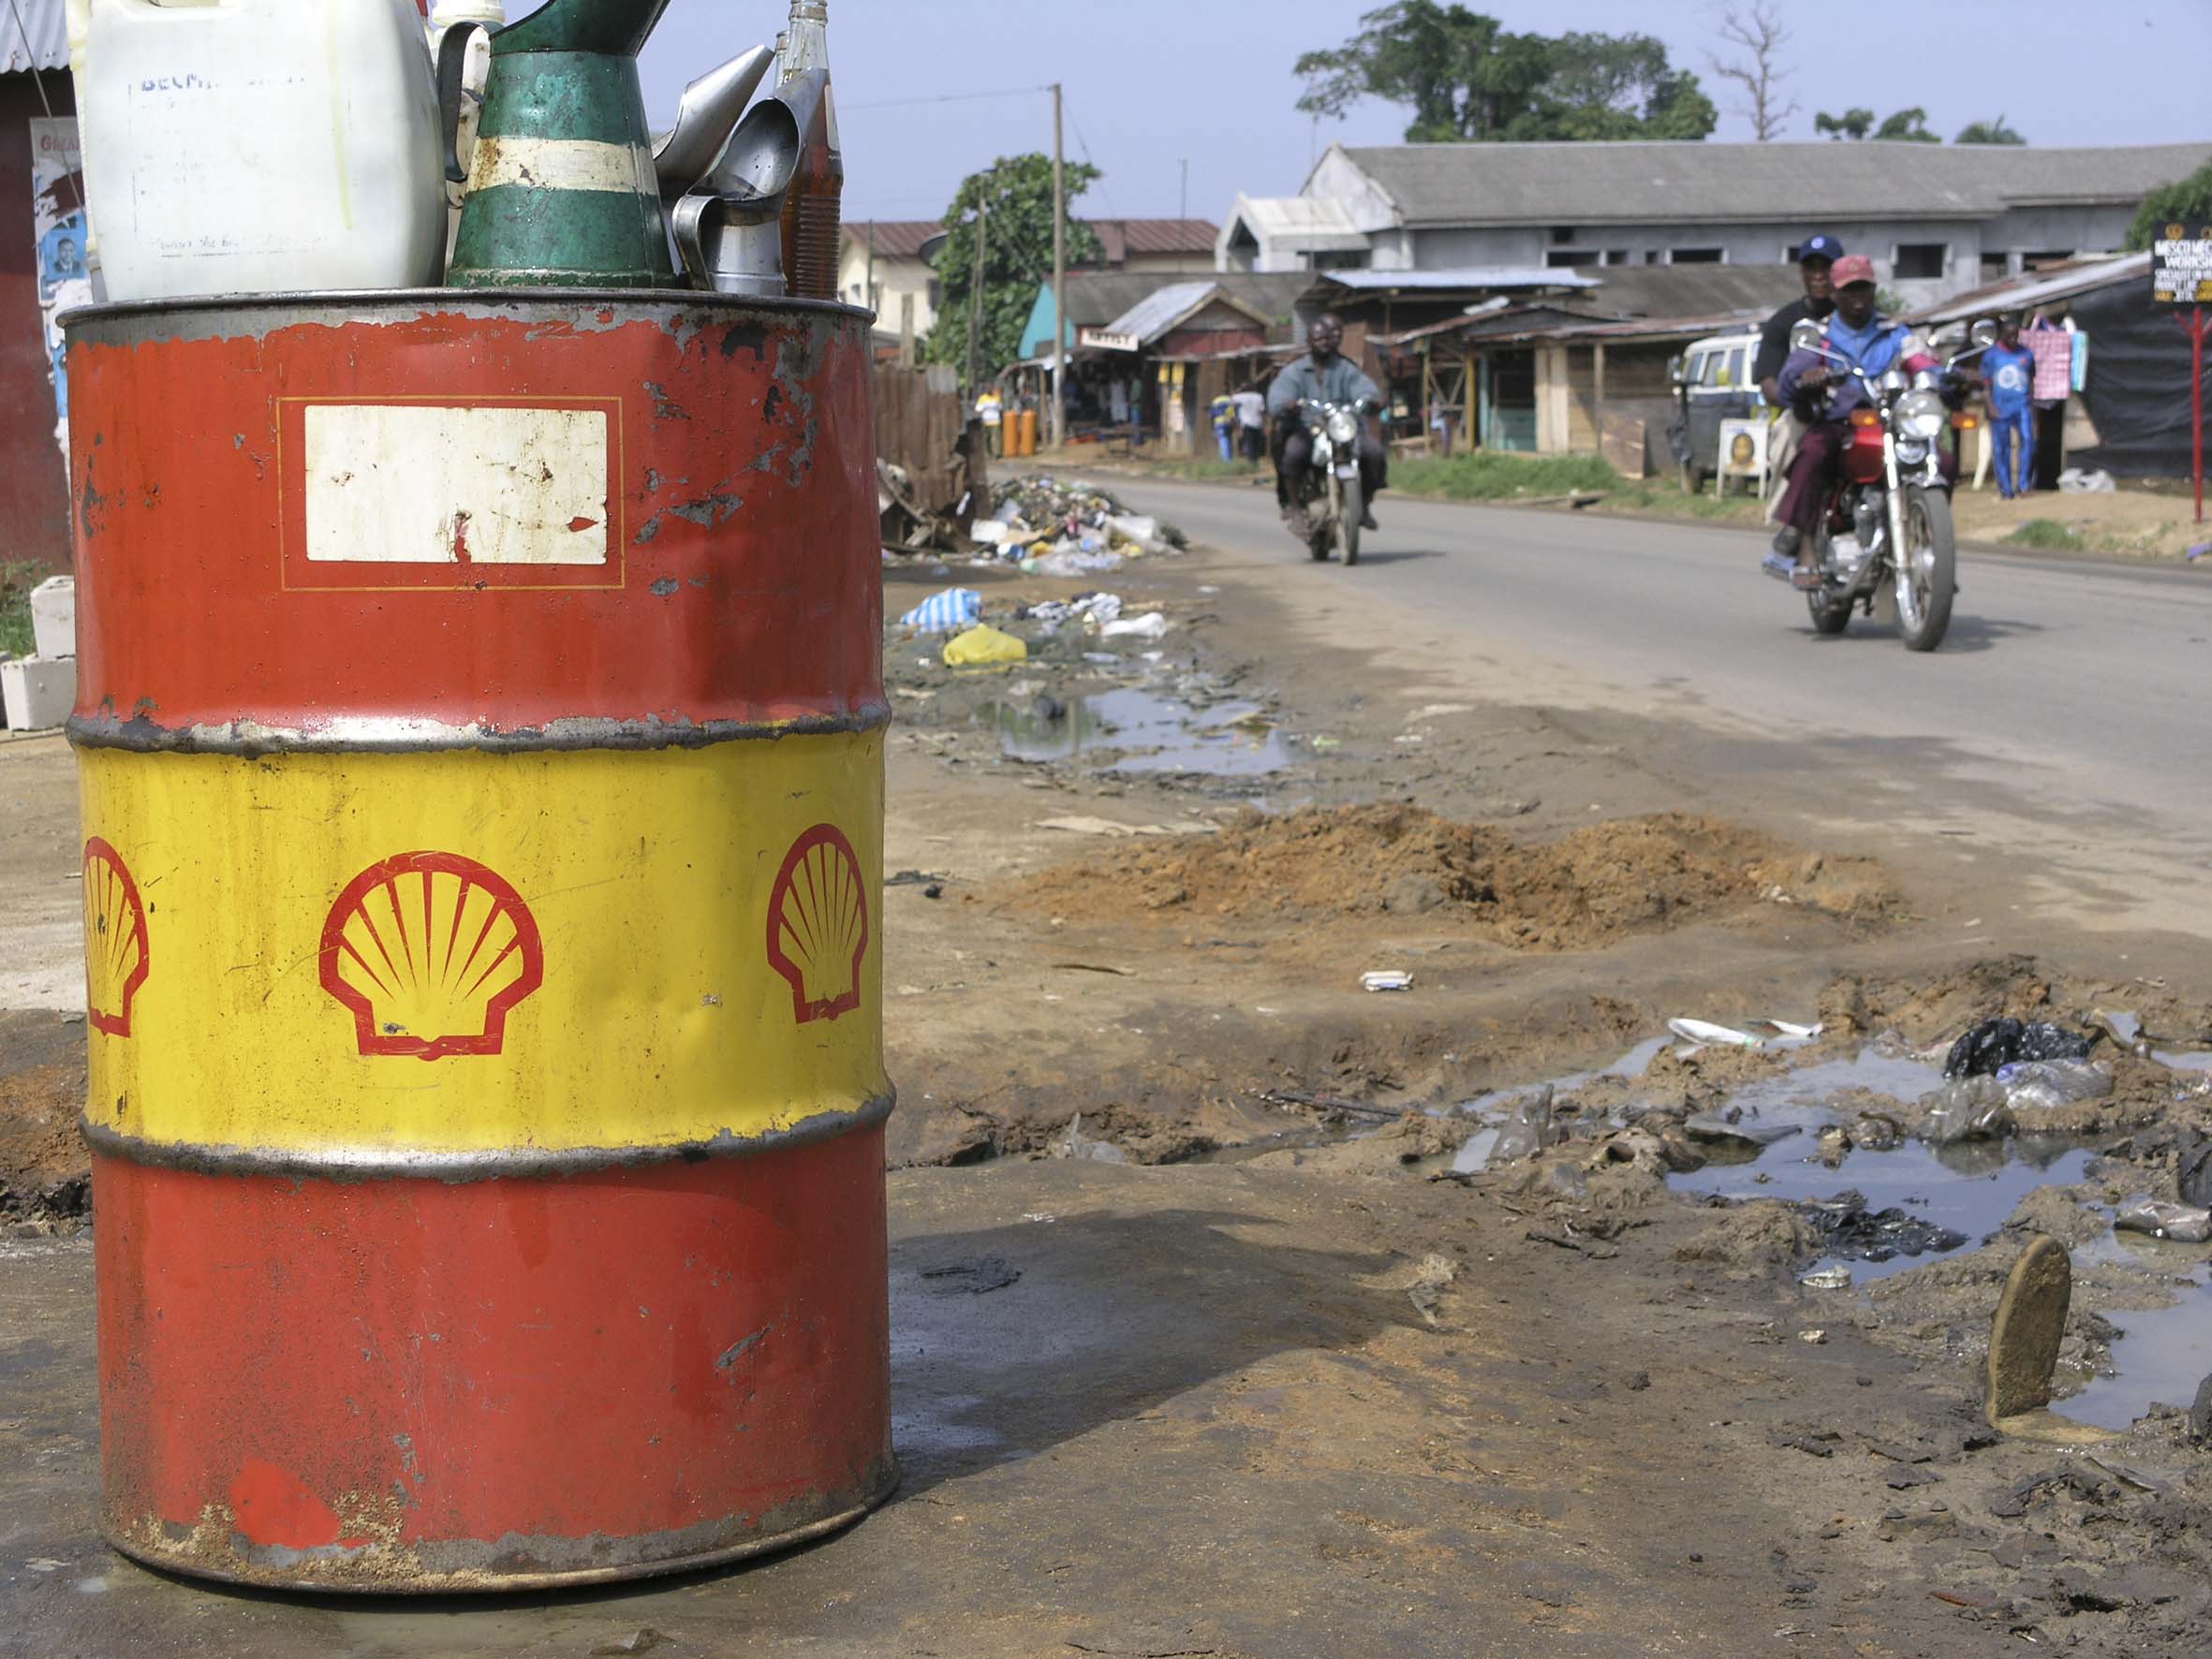 Shell to Pay $30 Million to Settle Nigeria Bribery Case